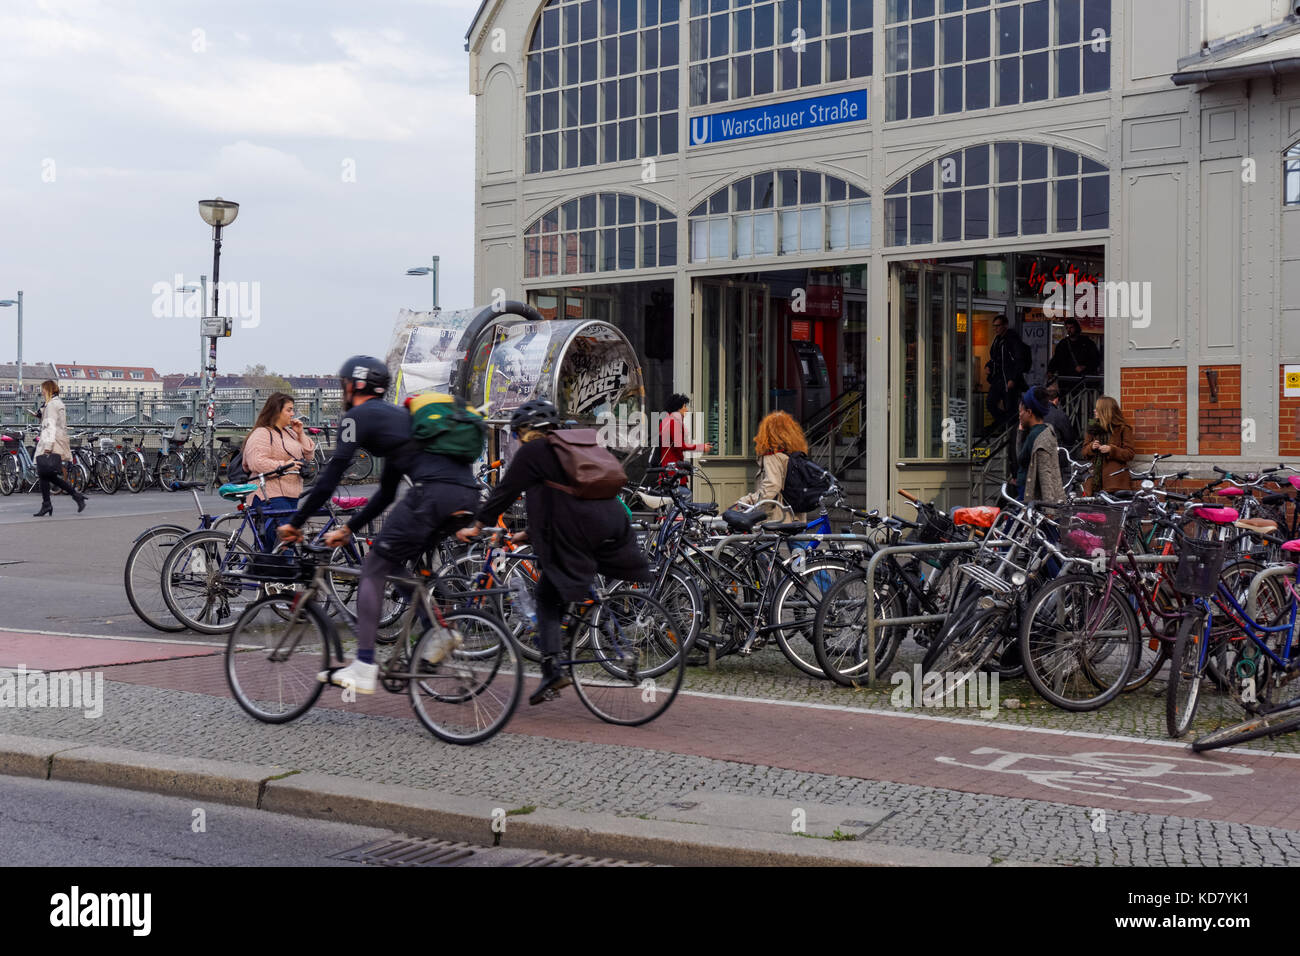 Cyclists in front of Warschauer Strasse station in Berlin, Germany Stock Photo